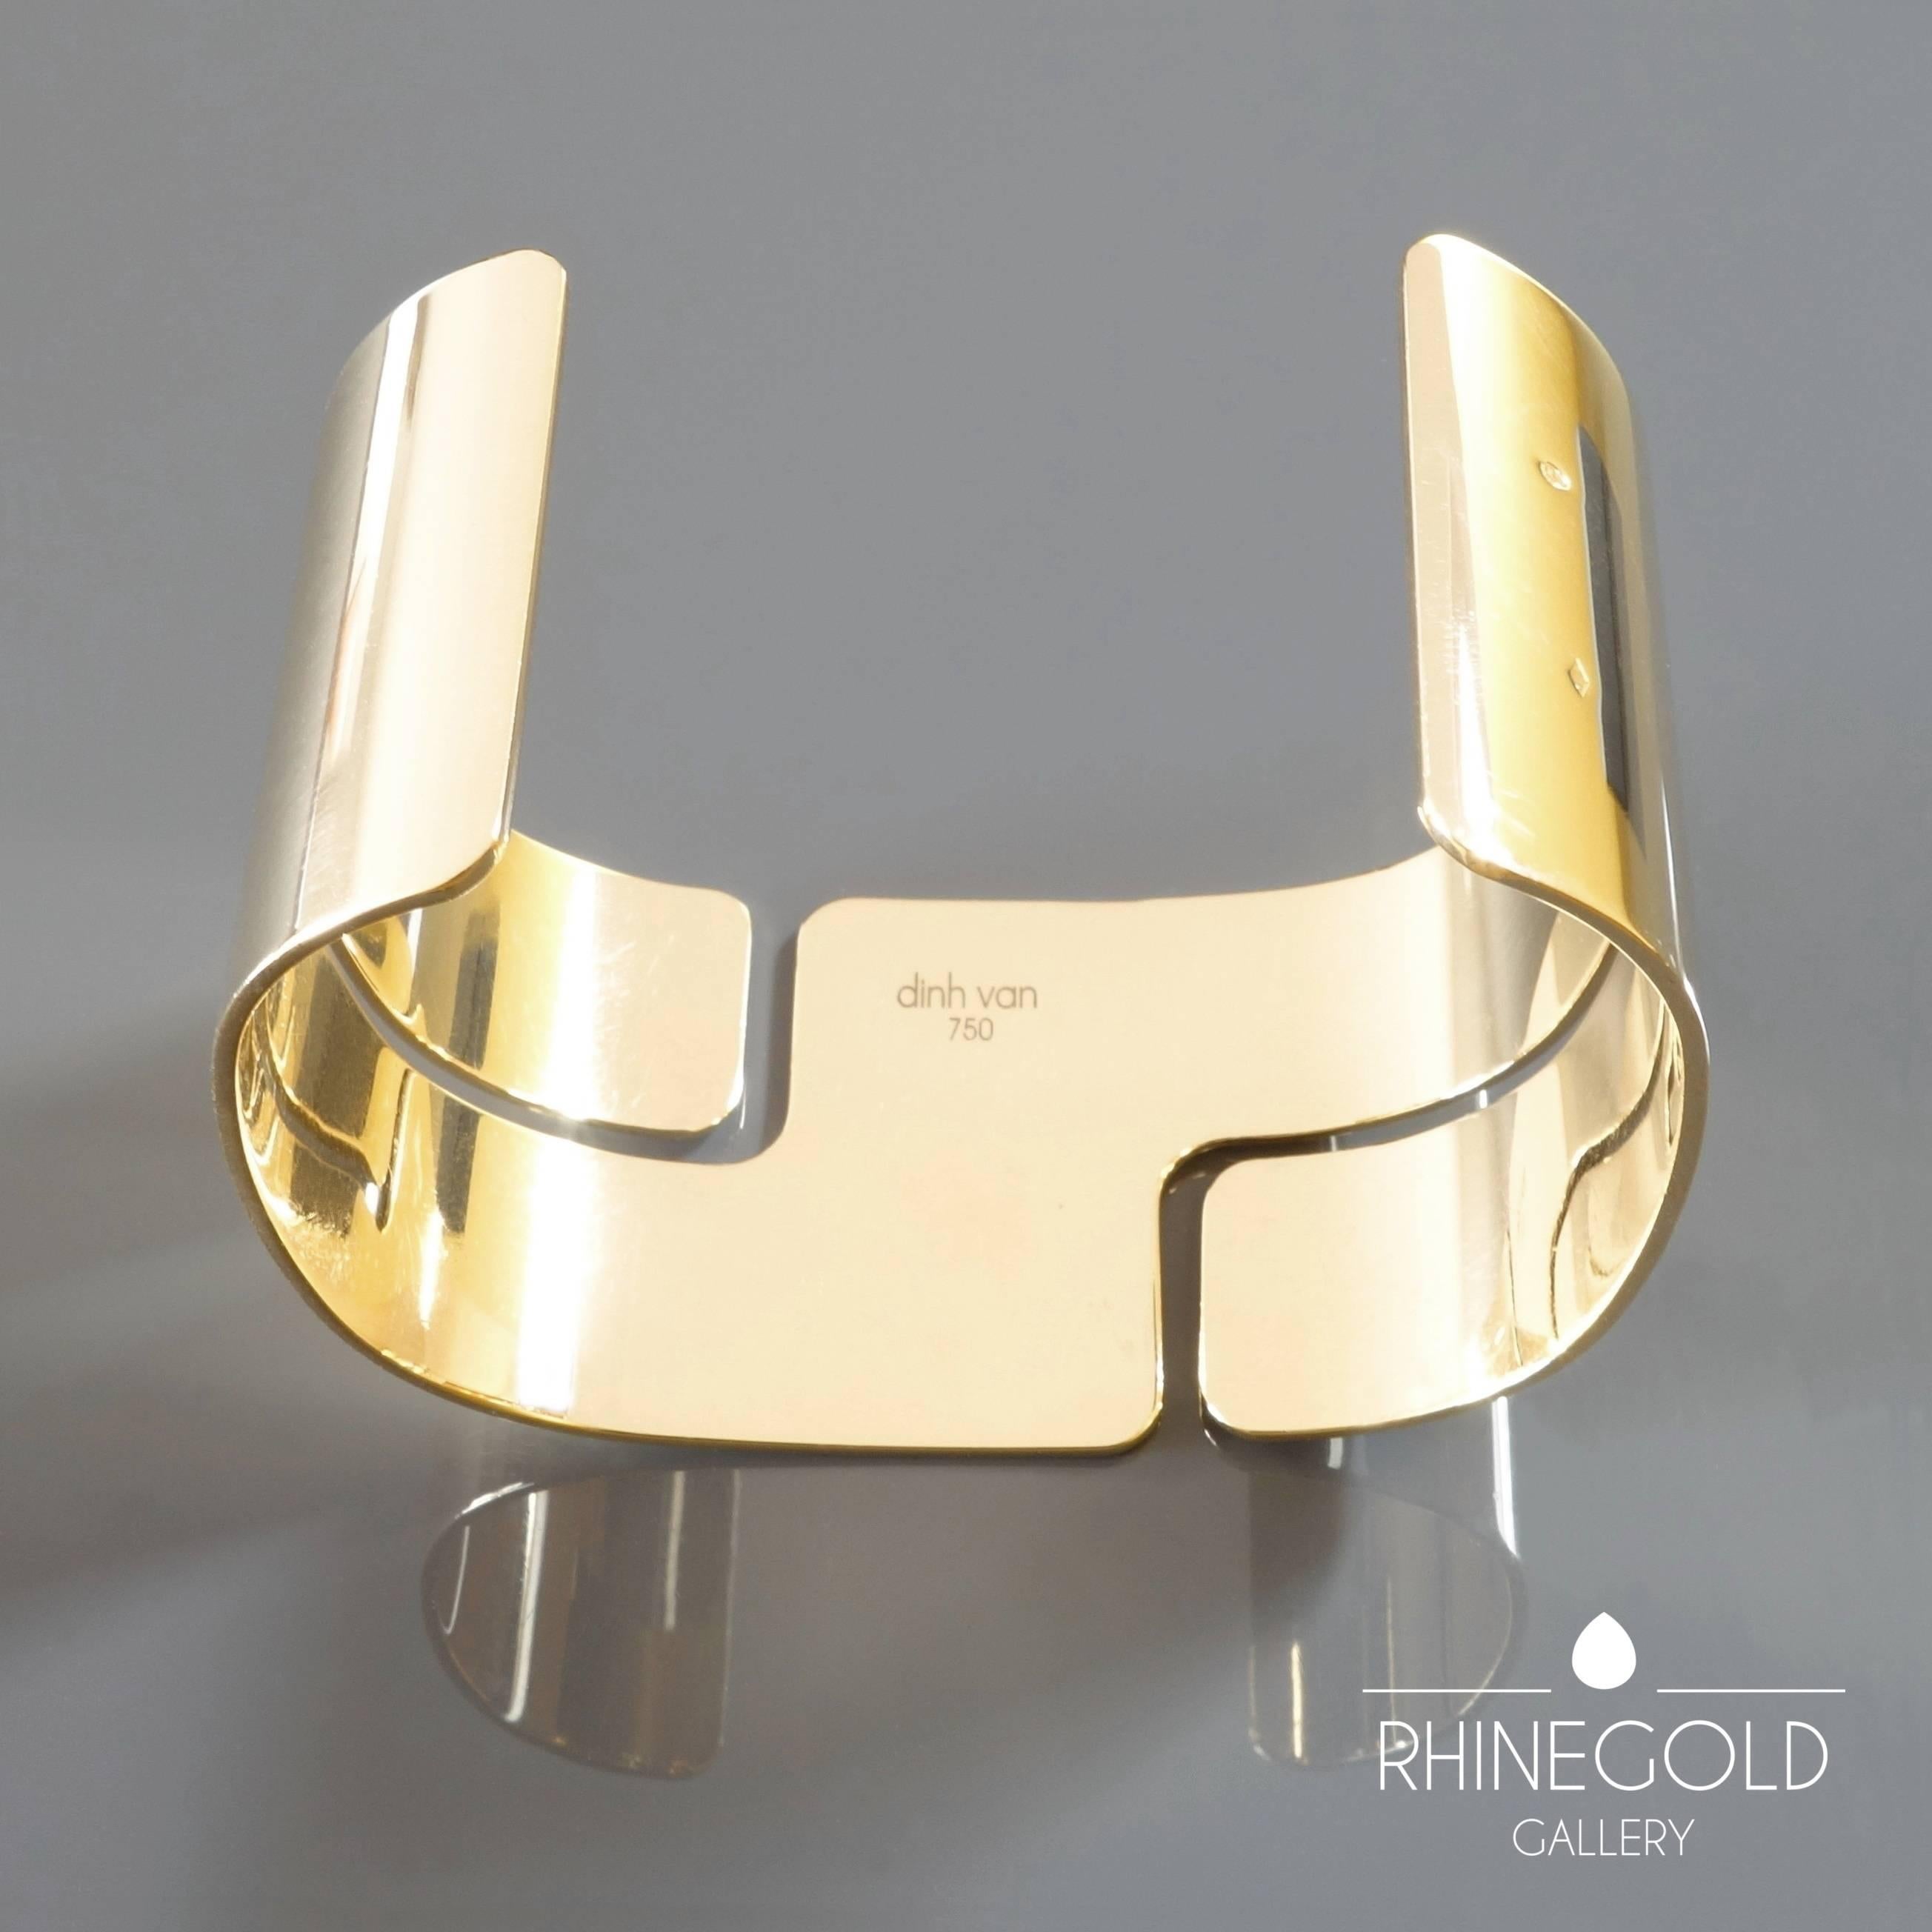 Dinh Van Modern Retro ‘Seventies’ Gold Cuff Bangle
18k yellow gold
Width 2.9 cm (approx. 1 1/8"), inner circumference (incl. gap) approx. 16 cm (6 5/16")
Weight 55.7 g
Marks: ‘dinh van 750’, French eagle mark for 18k gold, lozenge shaped